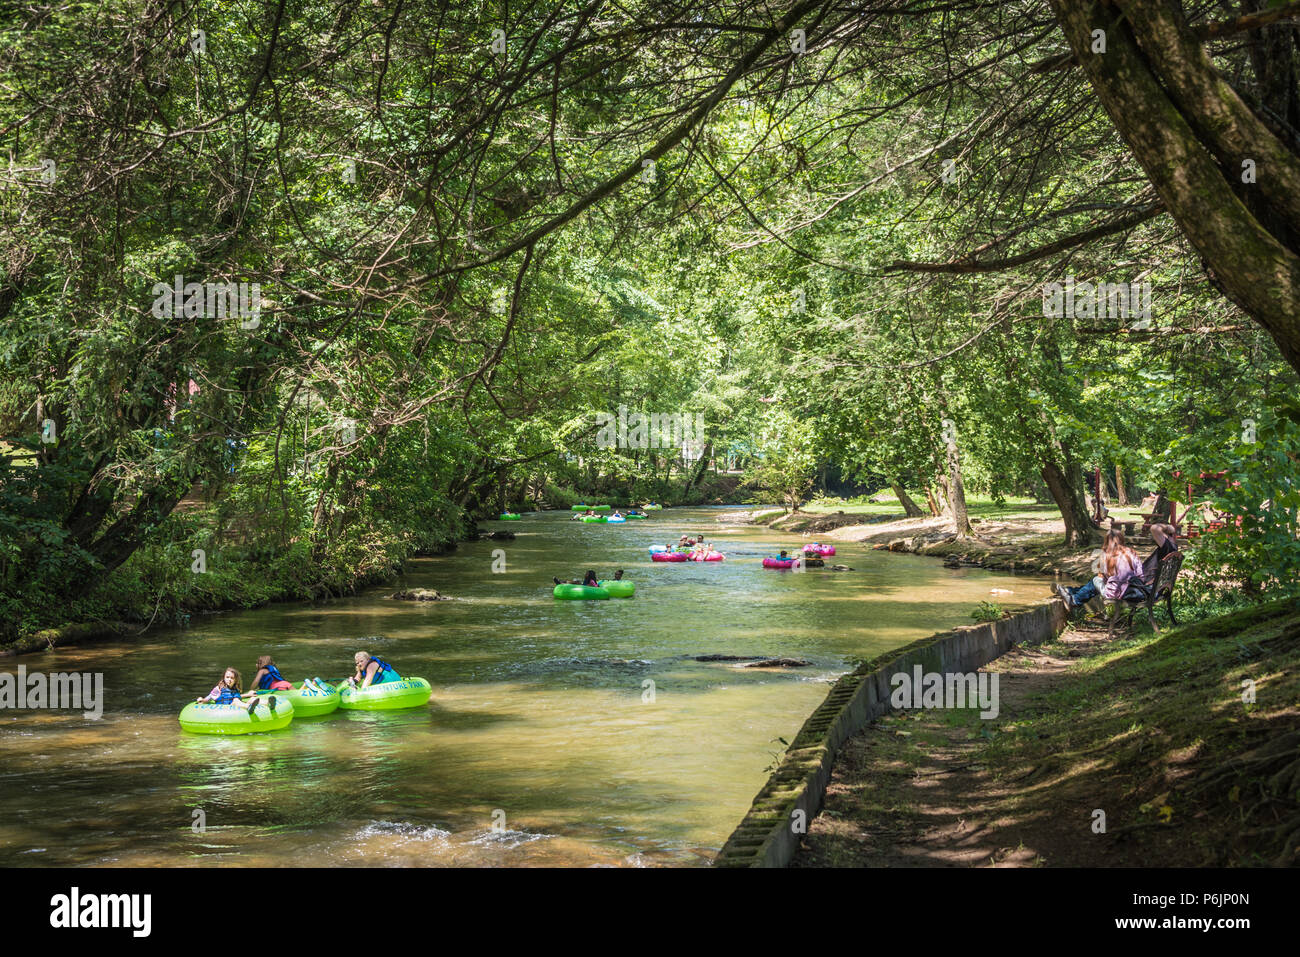 People enjoying a relaxing summer day under a canopy of trees on the Chattahoochee River in Helen, Georgia. (USA) Stock Photo